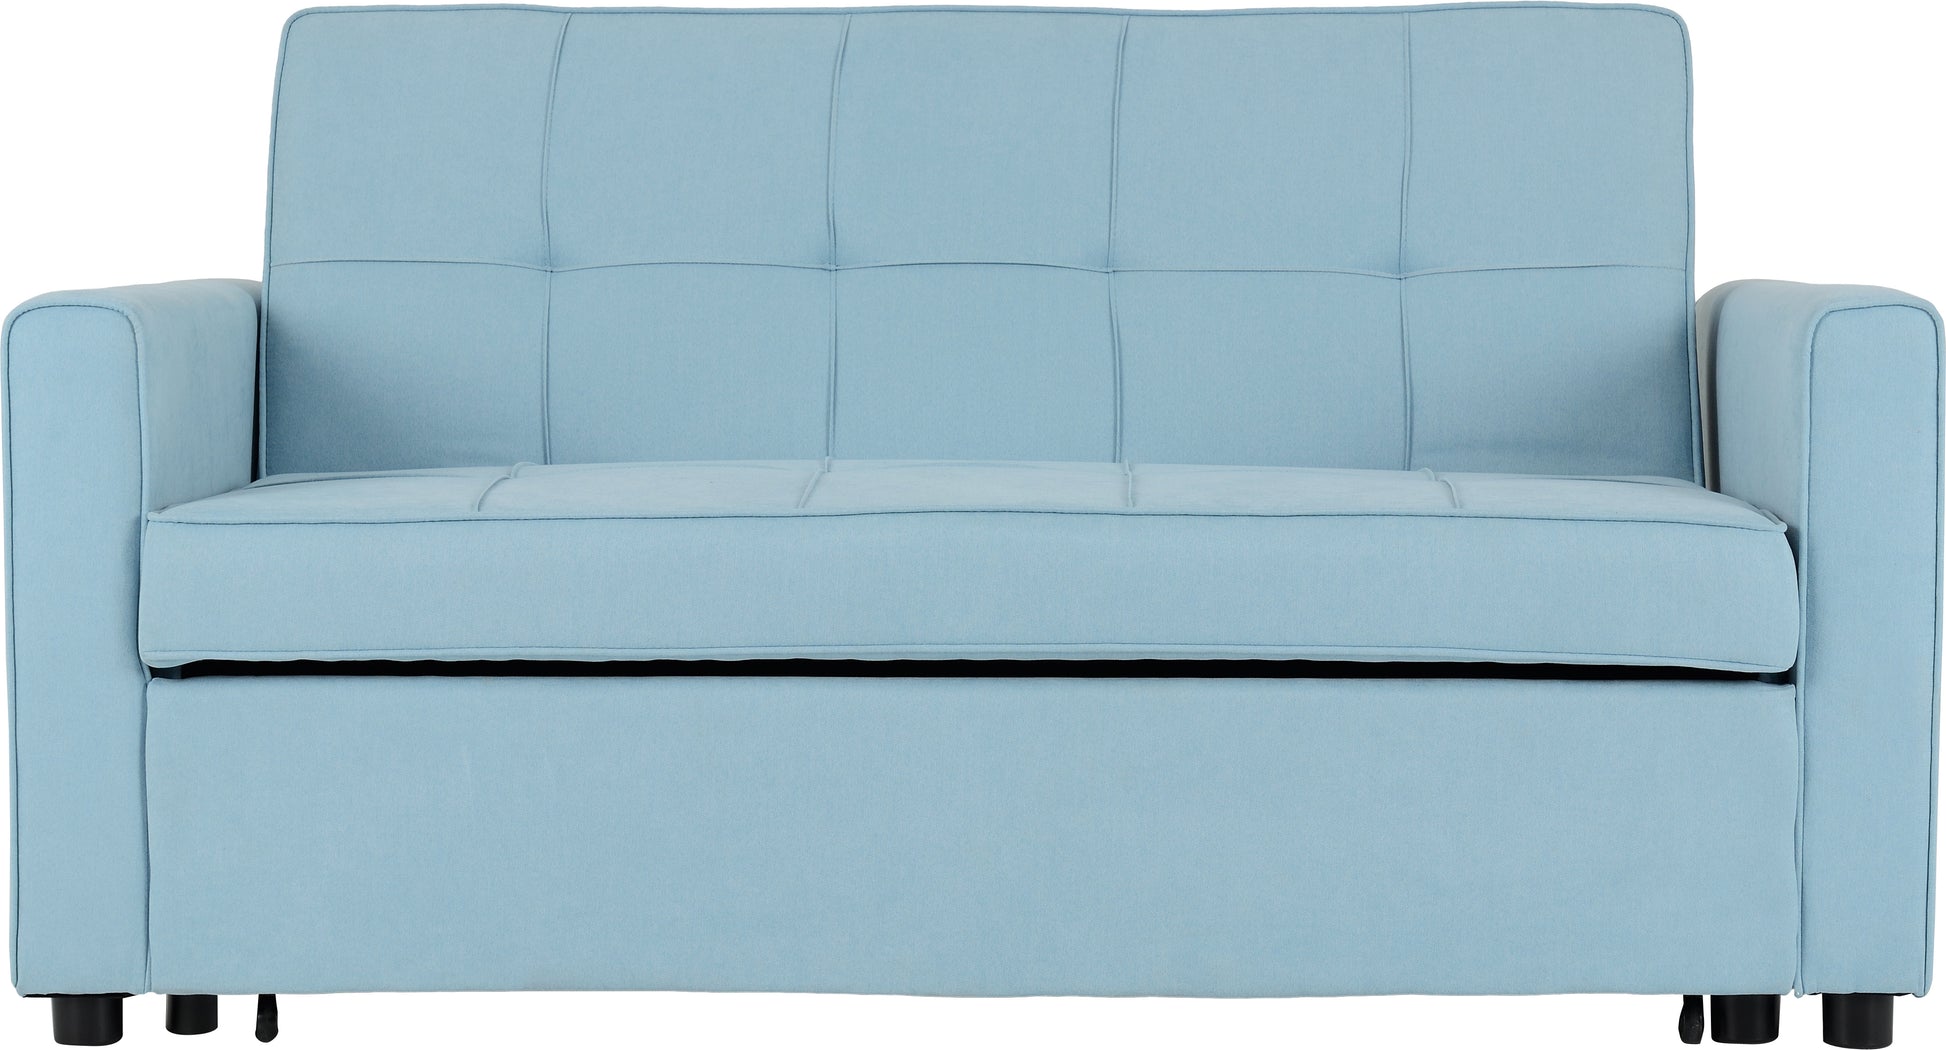 Astoria Sofa Bed - Light Blue Fabric - The Right Buy Store